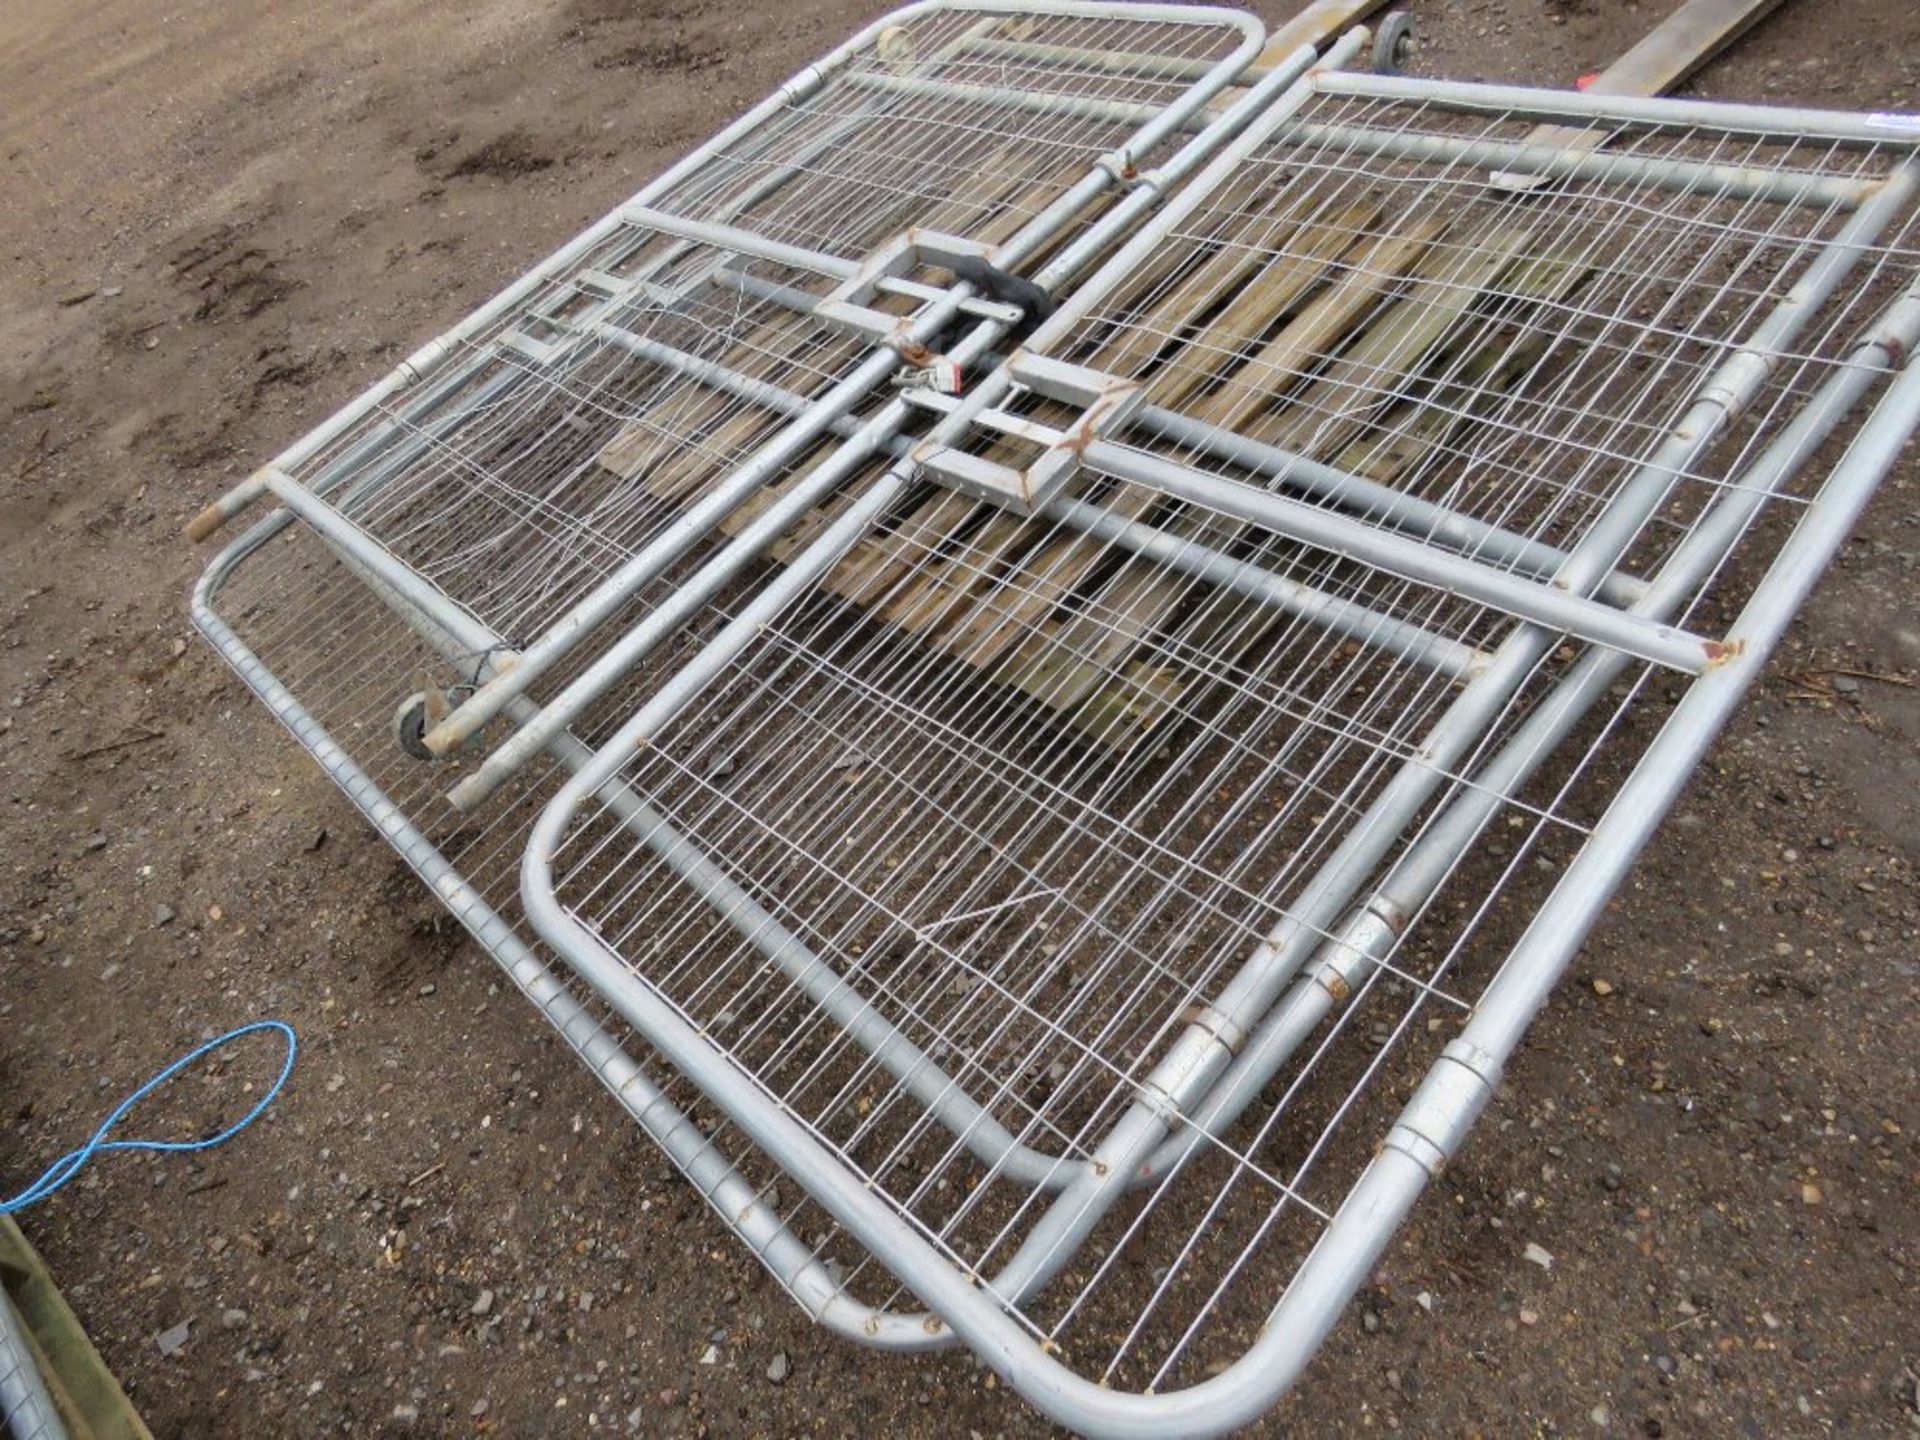 4 x HERAS TYPE TEMPORARY SITE FENCE PANEL GATES; 2@1M PLUS 2 @2M APPROX. - Image 3 of 3